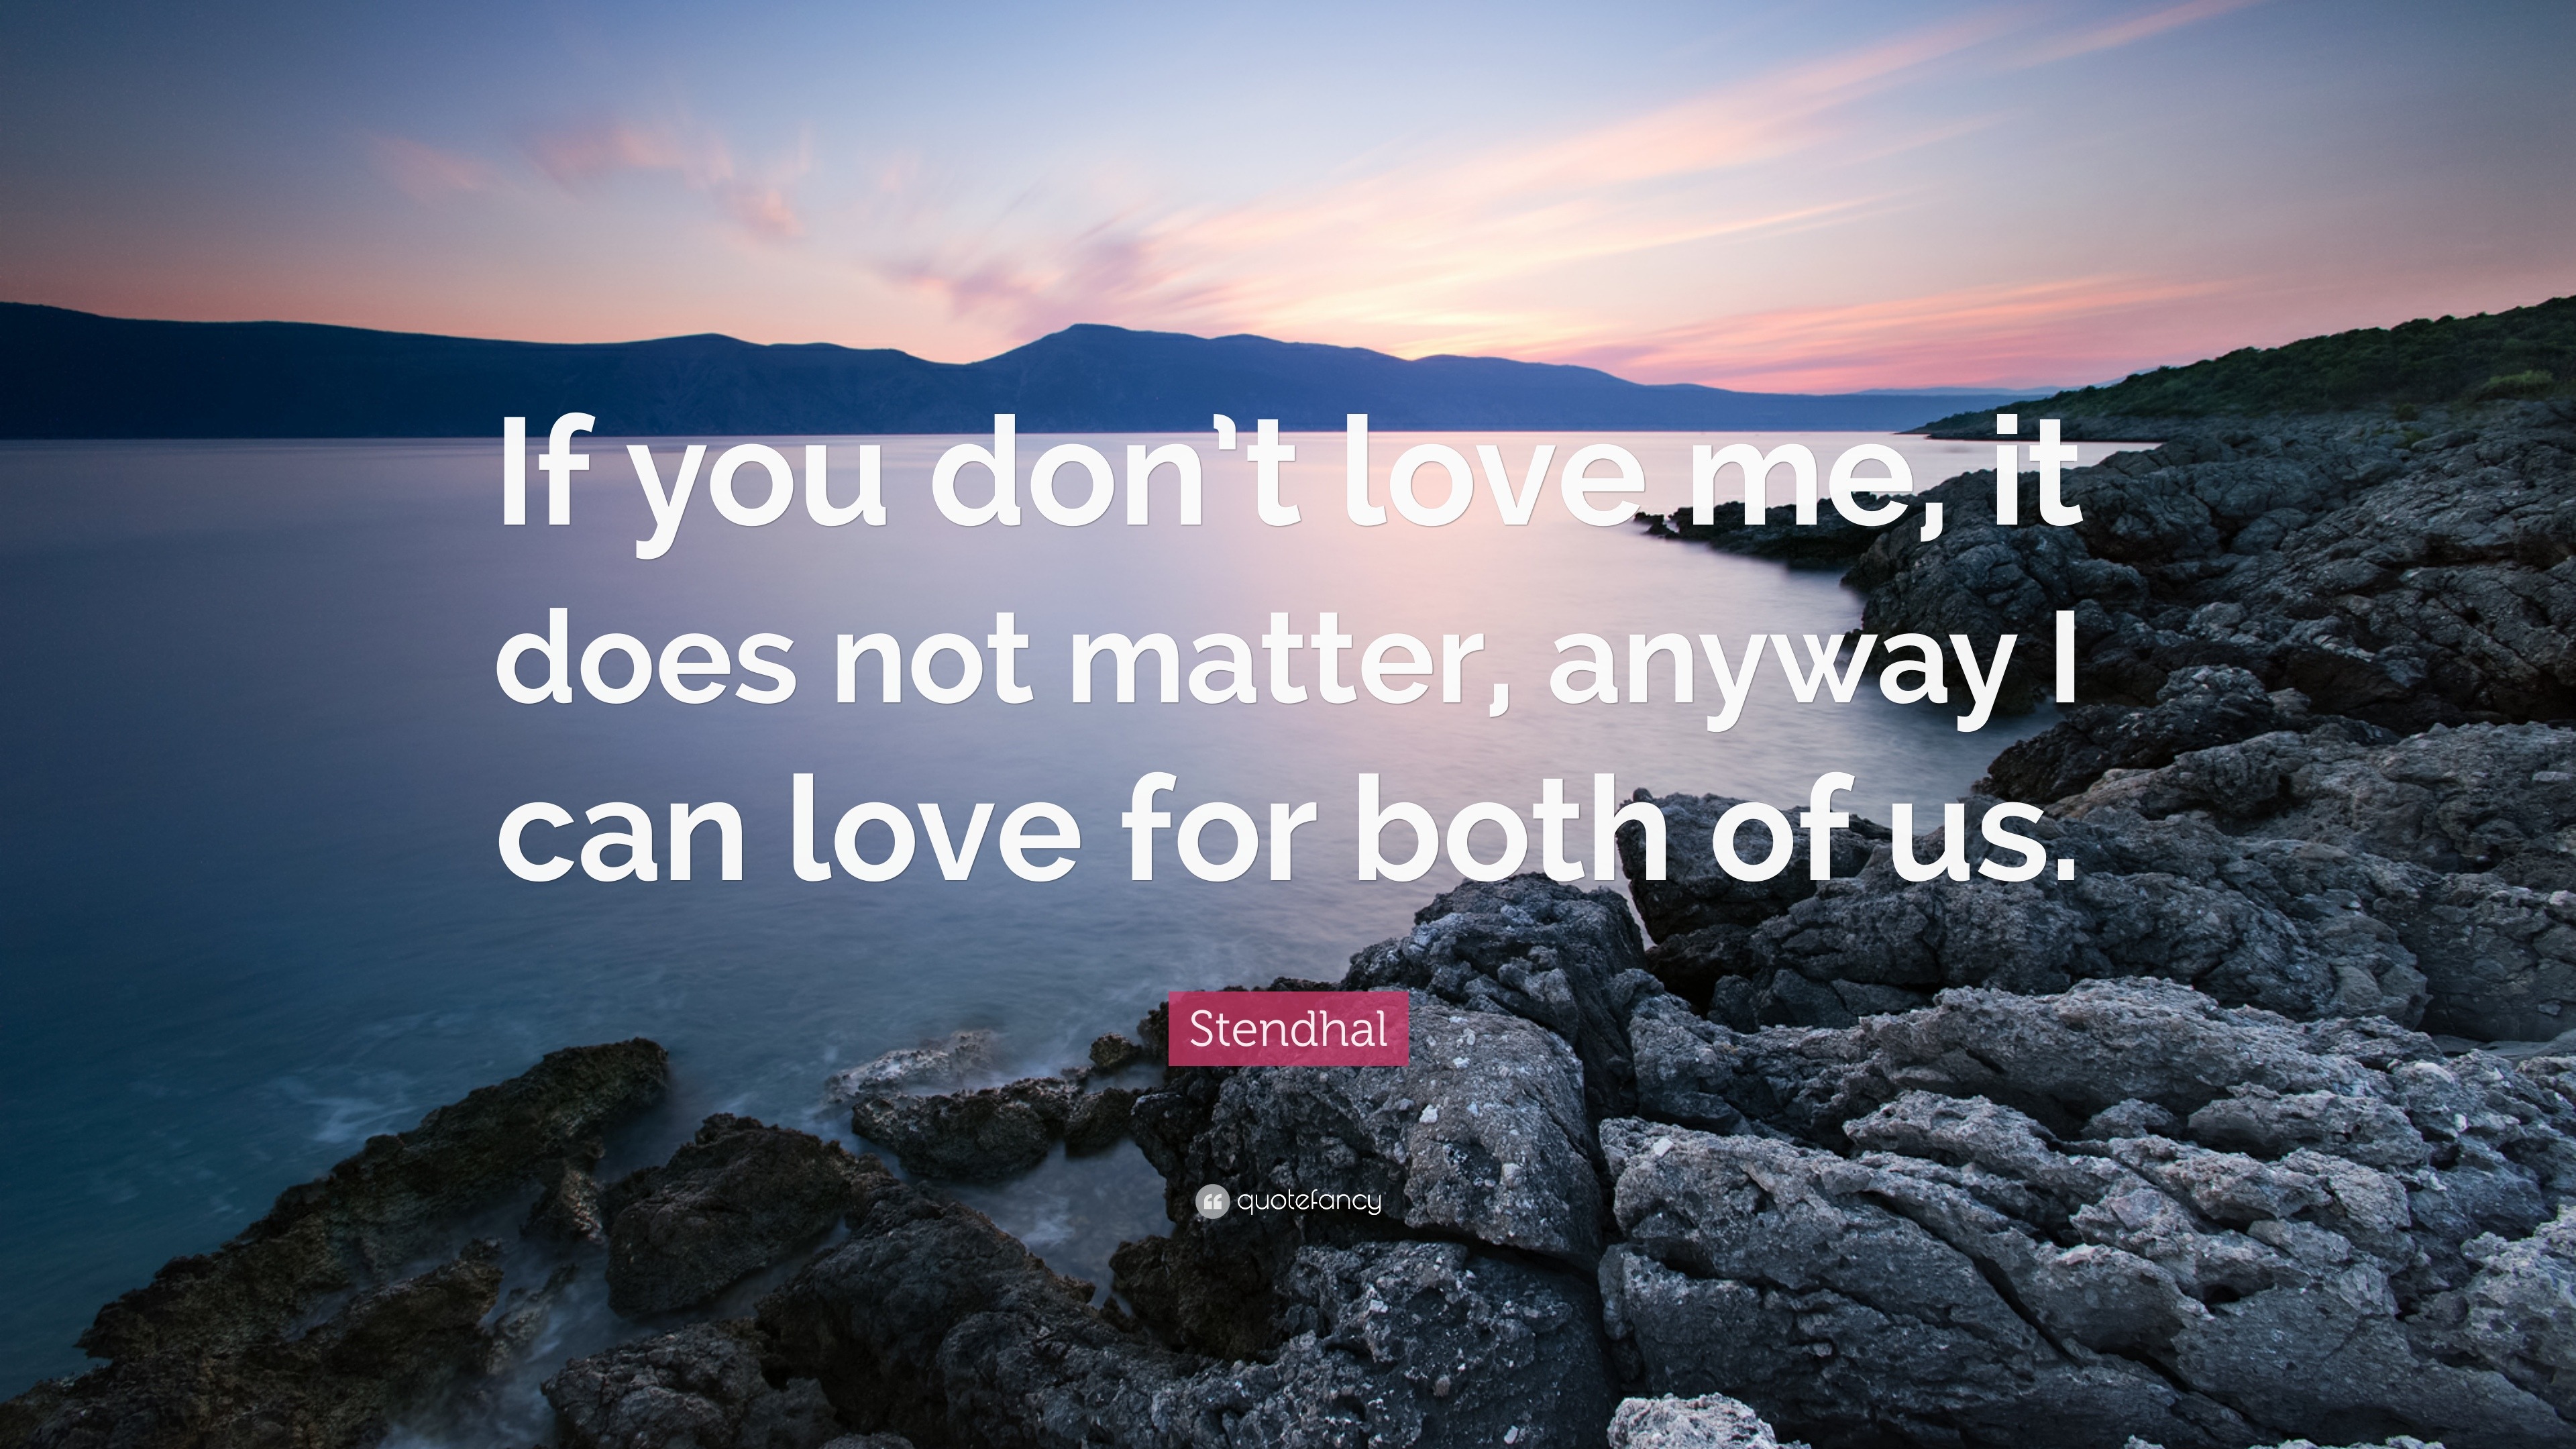 Stendhal Quote “If you don t love me it does not matter